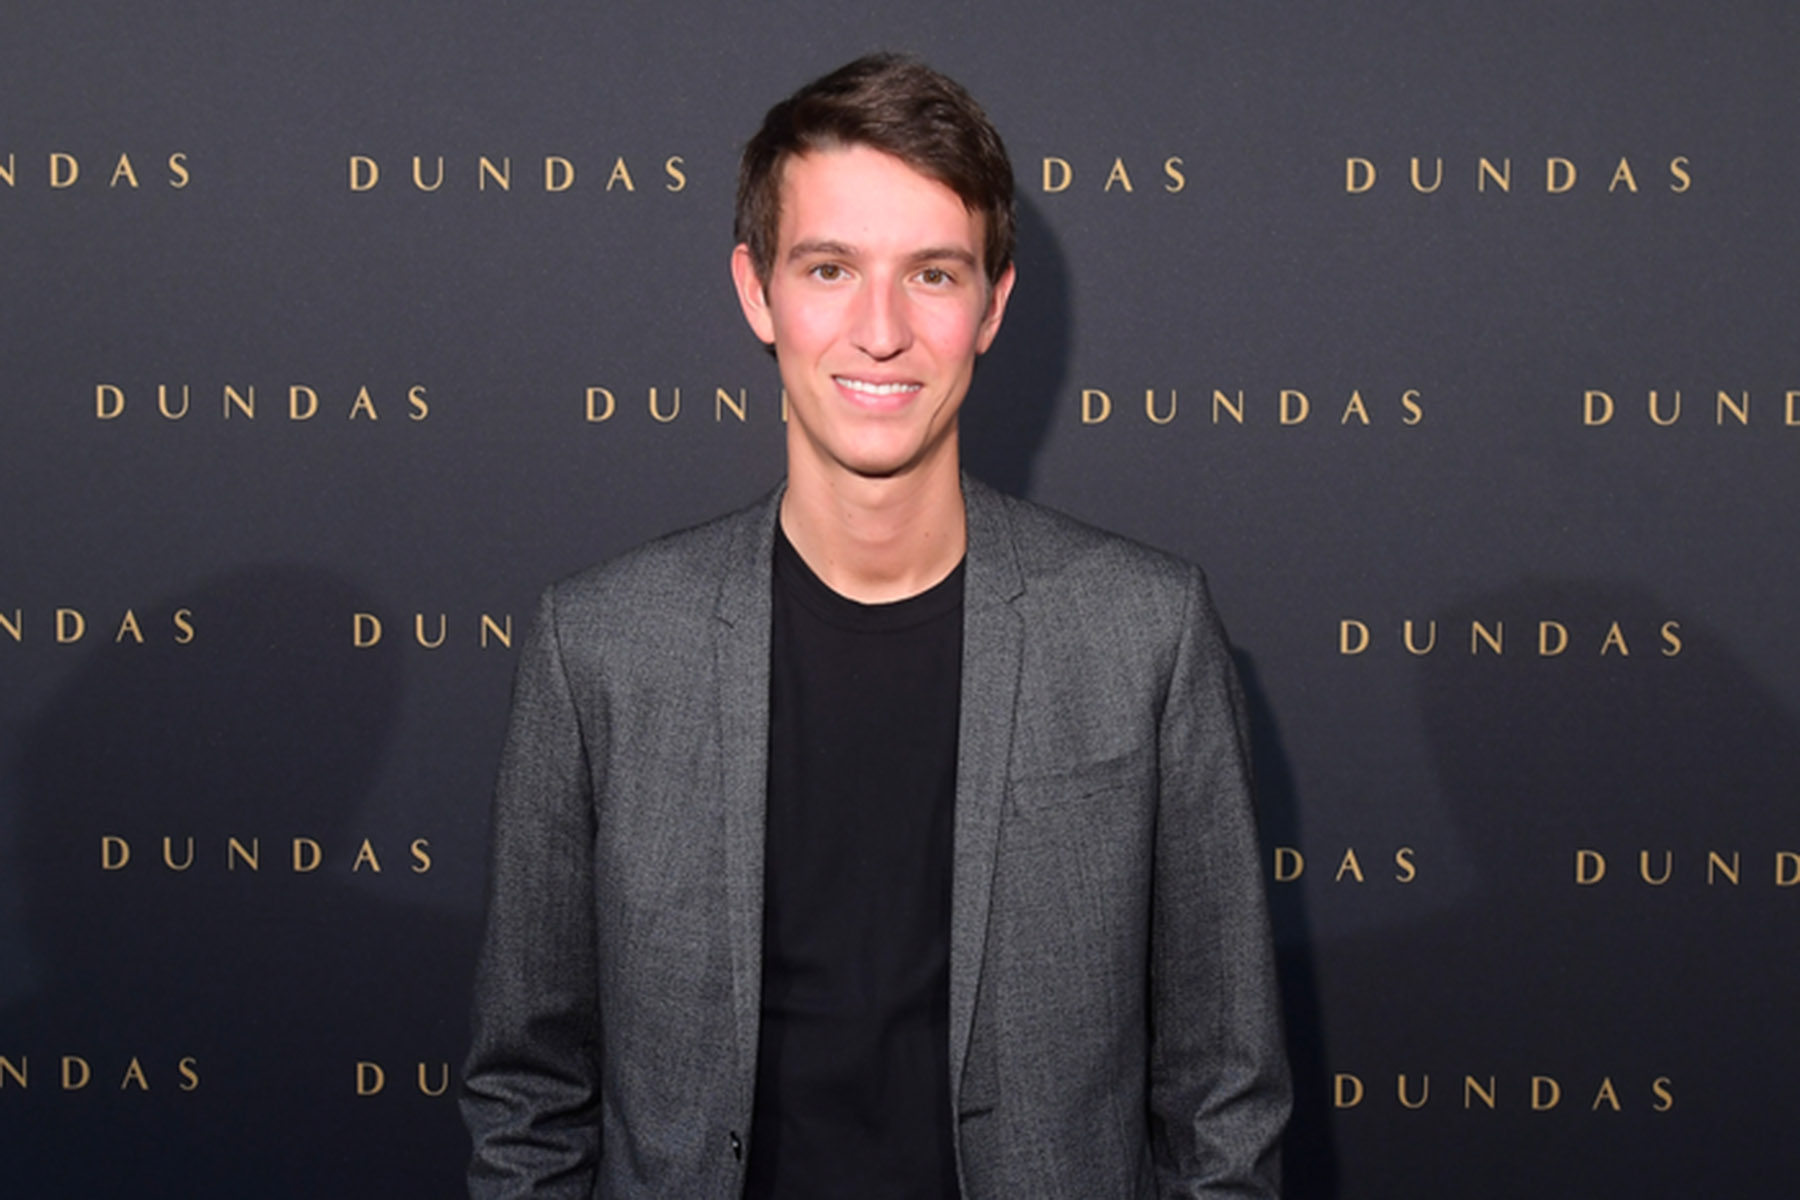 Alexandre Arnault joins the team leading LVMH's newly acquired